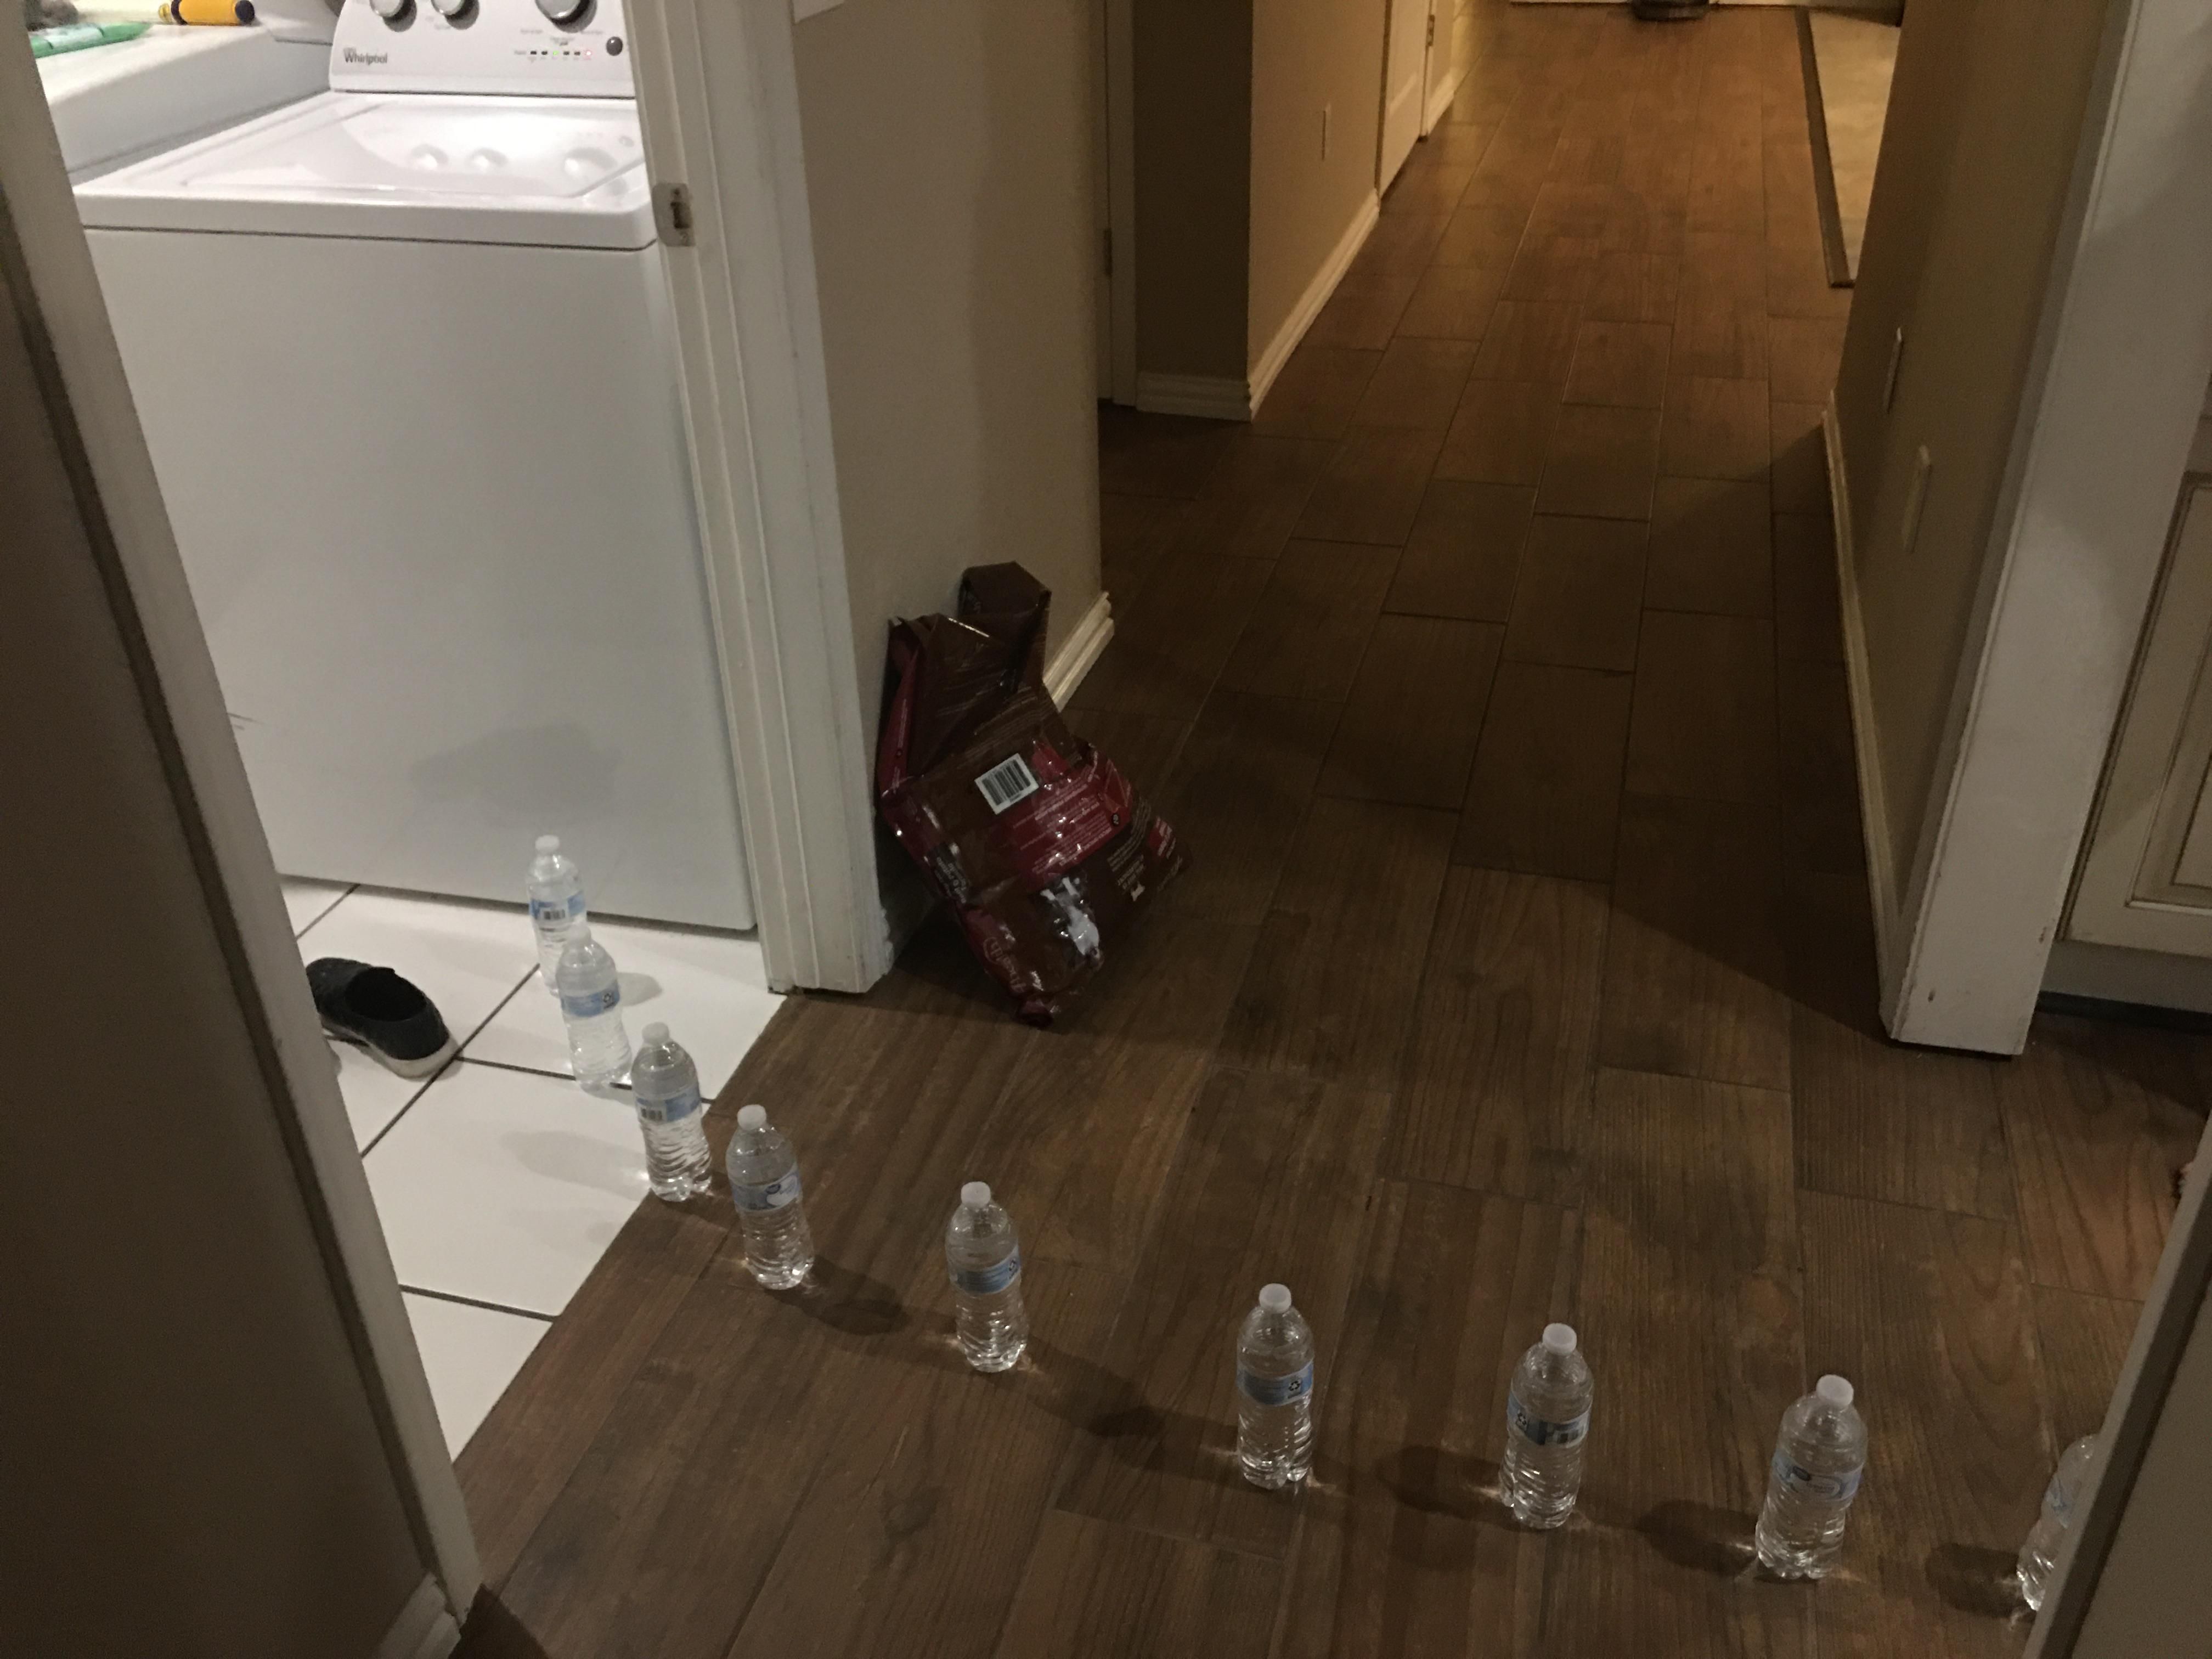 My kids came in and told me there was water coming from the laundry room. They said it looked like it started at the washer. I rushed in to find this. Buncha comedians in my house...